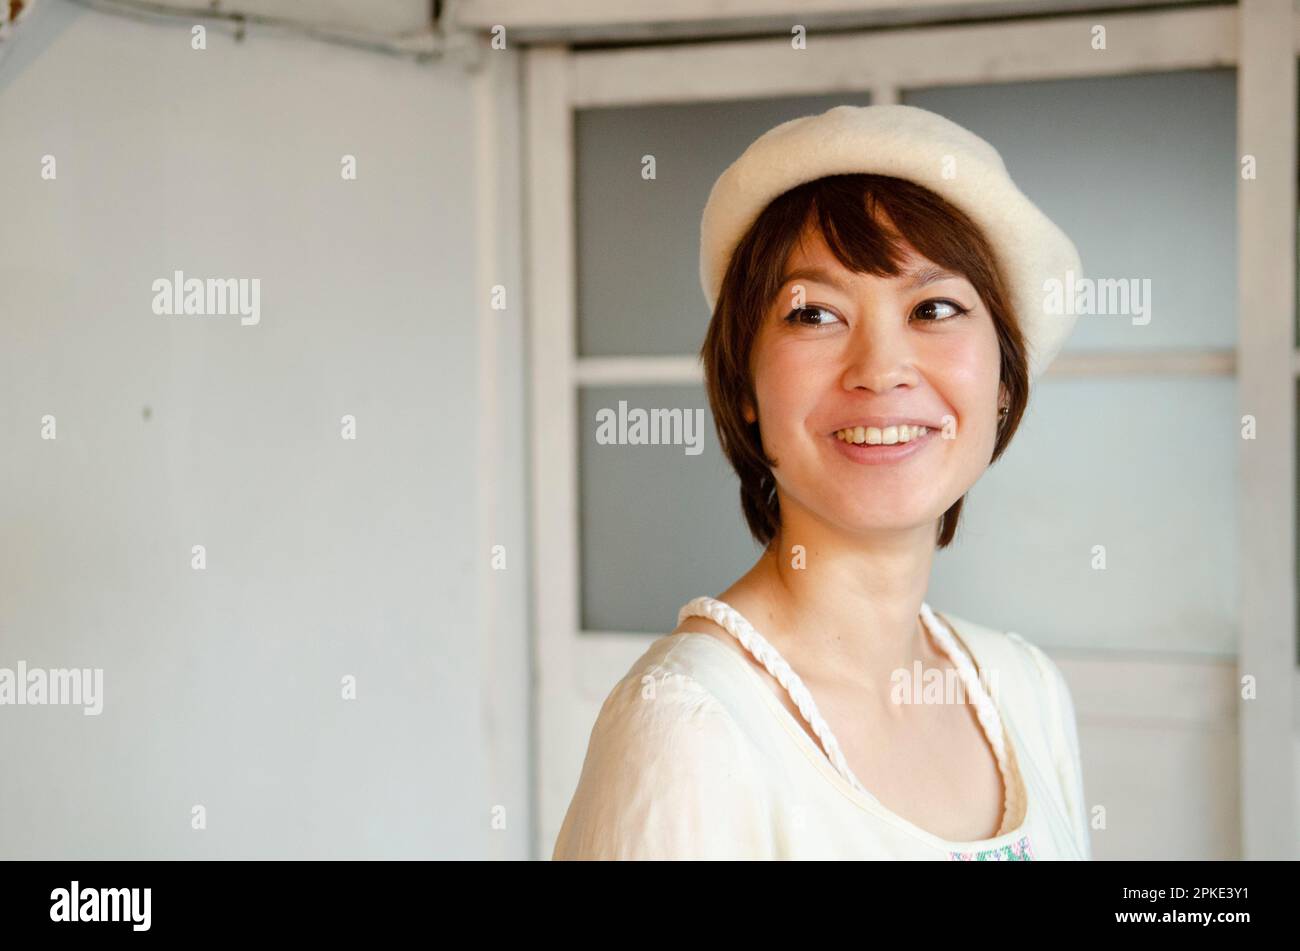 Woman laughing wearing a beret Stock Photo